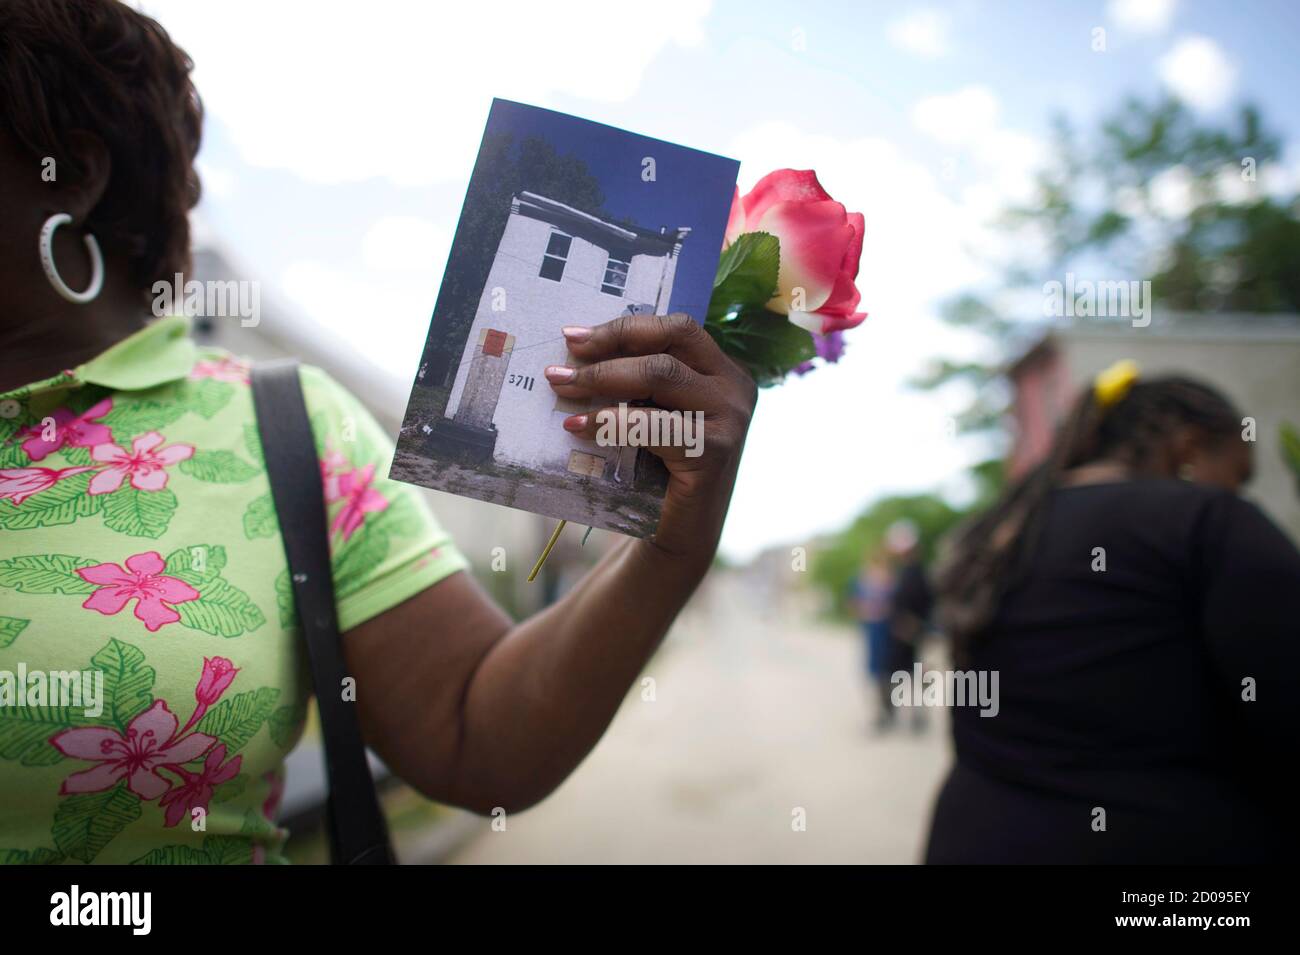 Local resident Anita Whitley, 61, holds a program and flower at 'Funeral for a Home,' a tribute for a dilapidated row house which survived 142 years and outlived many of its neighbours, in Mantua, Philadelphia May 31, 2014. Mourners came to 3711 Mellon Street in the Mantua section of Philadelphia to pay their respects to its history and to a once vibrant neighborhood that has experienced decades of decline. Organized in part by Philadelphia's Temple University, the event mixed art and public history to honor the lives of ordinary residents.   REUTERS/Mark Makela (UNITED STATES - Tags: SOCIETY) Stock Photo